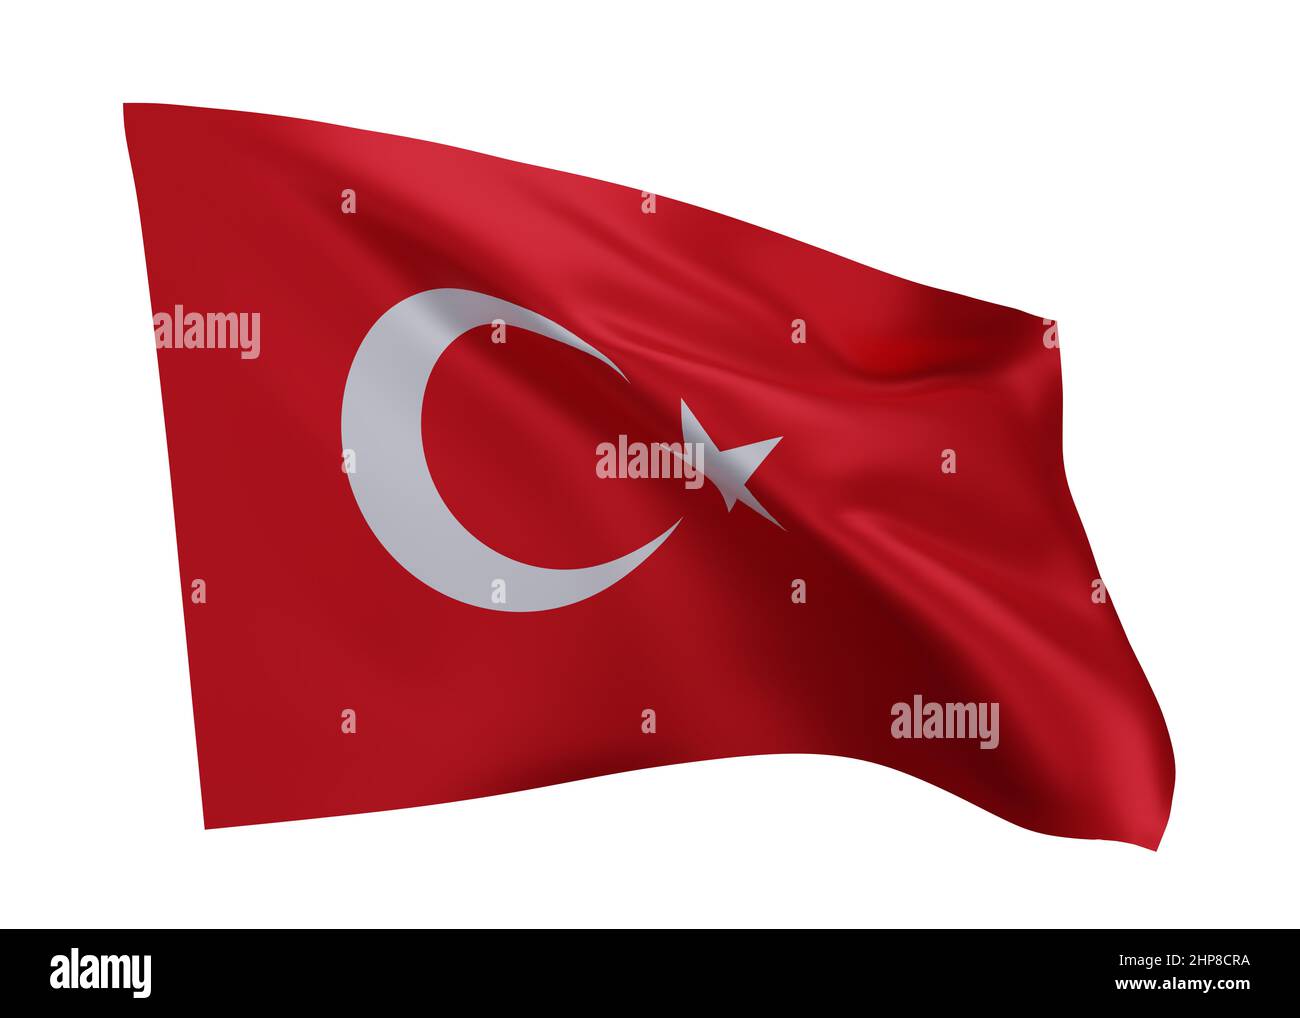 3d illustration flag of Turkey. Turkish high resolution flag isolated against white background. 3d rendering Stock Photo